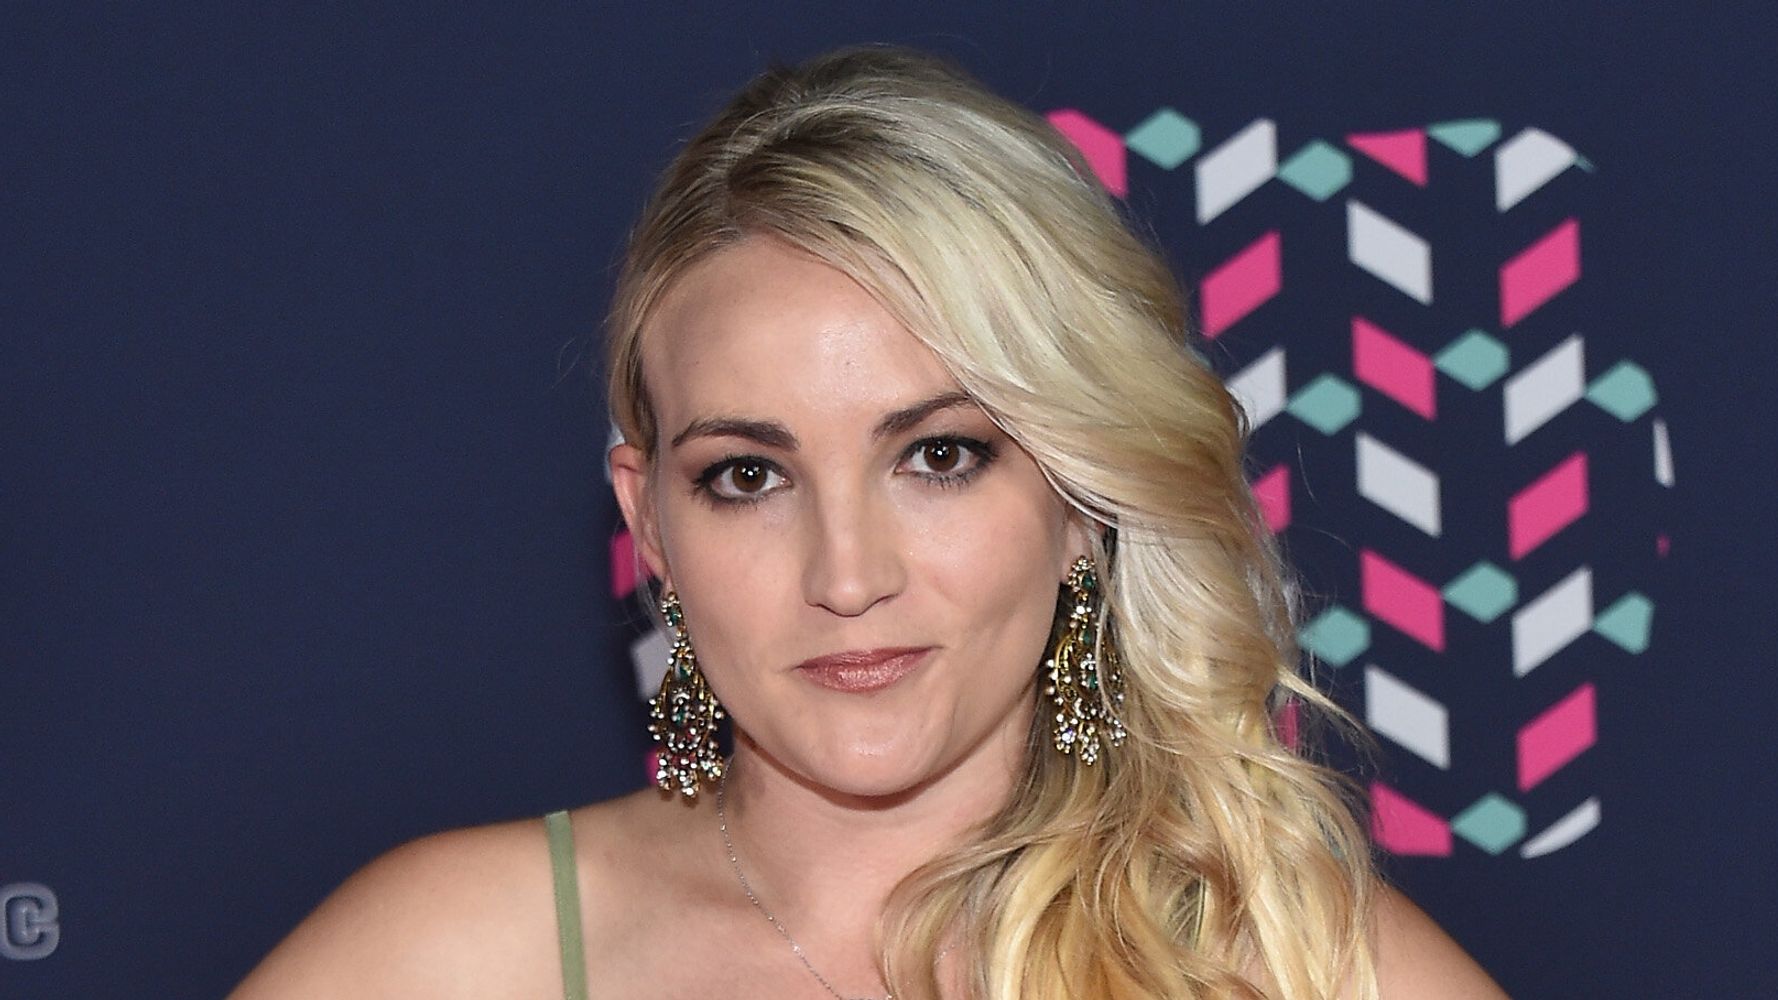 Jamie Lynn Spears Disables Comments On Instagram After #FreeBritney Harassment